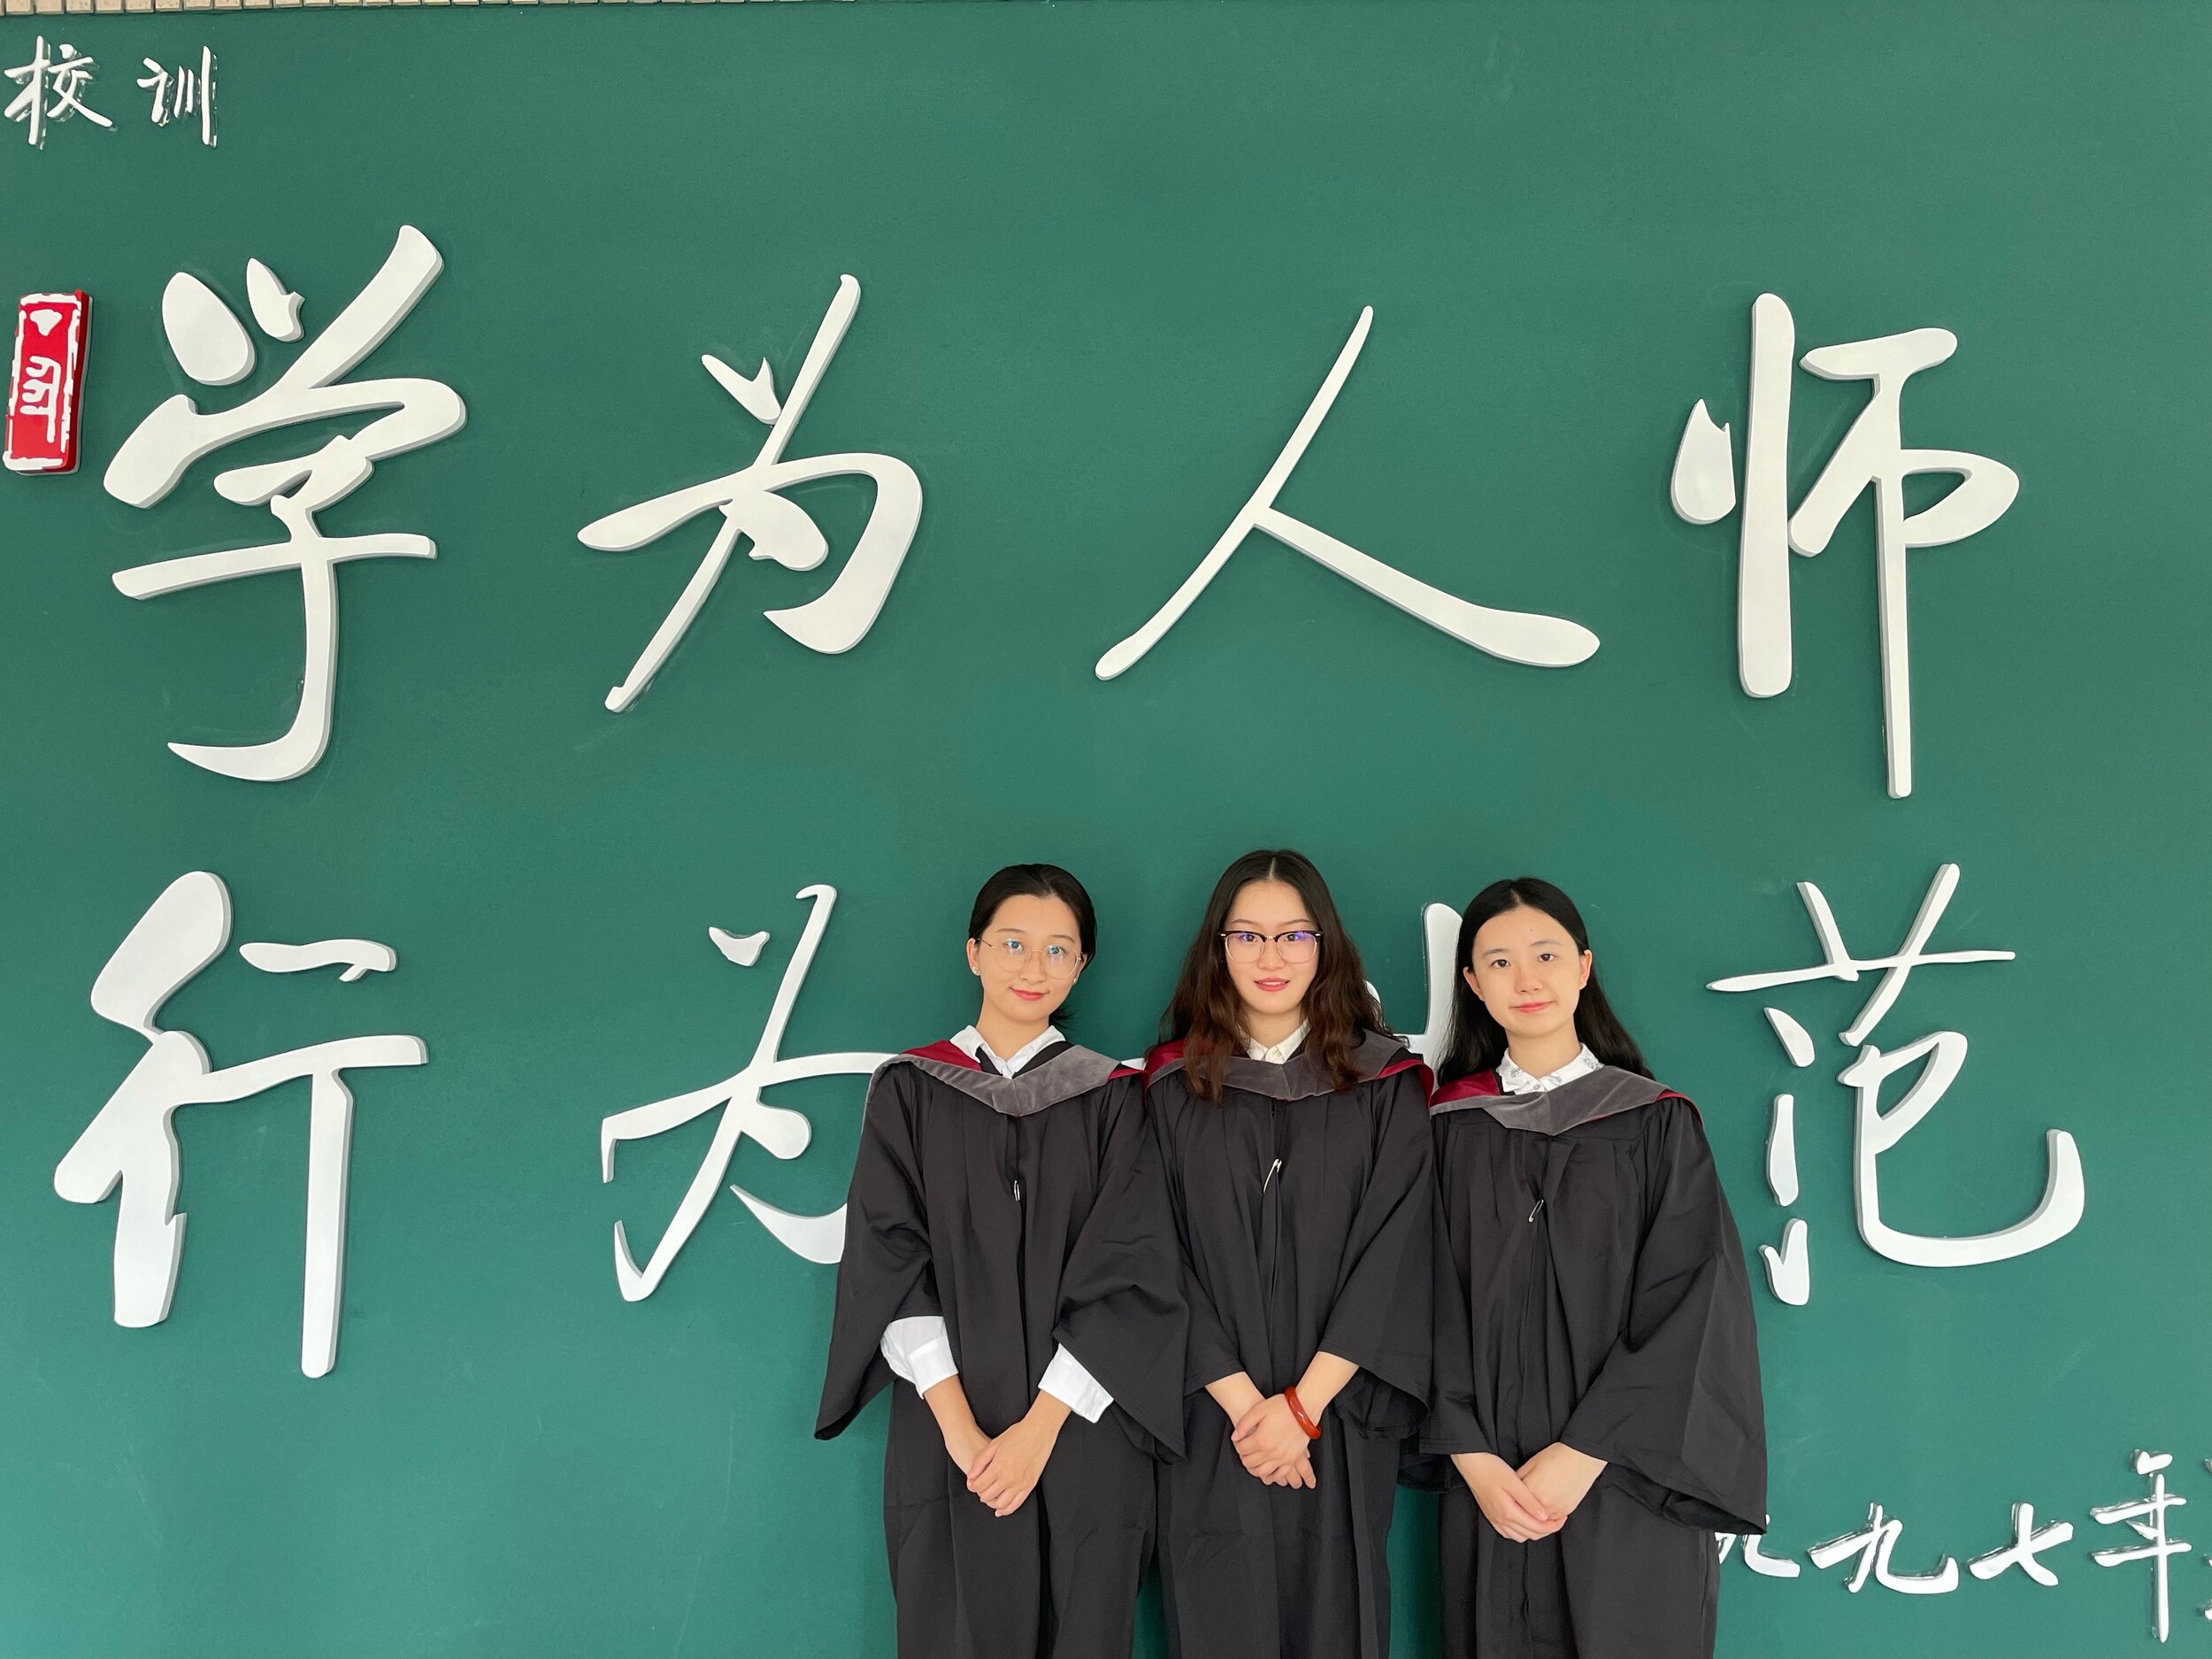   Graduates from the Joint BComm Program complete 2 degrees: a Bachelor of Commerce (major in finance) from SMU and a Bachelor of Economics from BNUZ. Zhao Xinyi (left), Lu Jingyi (centre) and Tang Ziluo (right) pose for a photo wearing the Sobey BCo